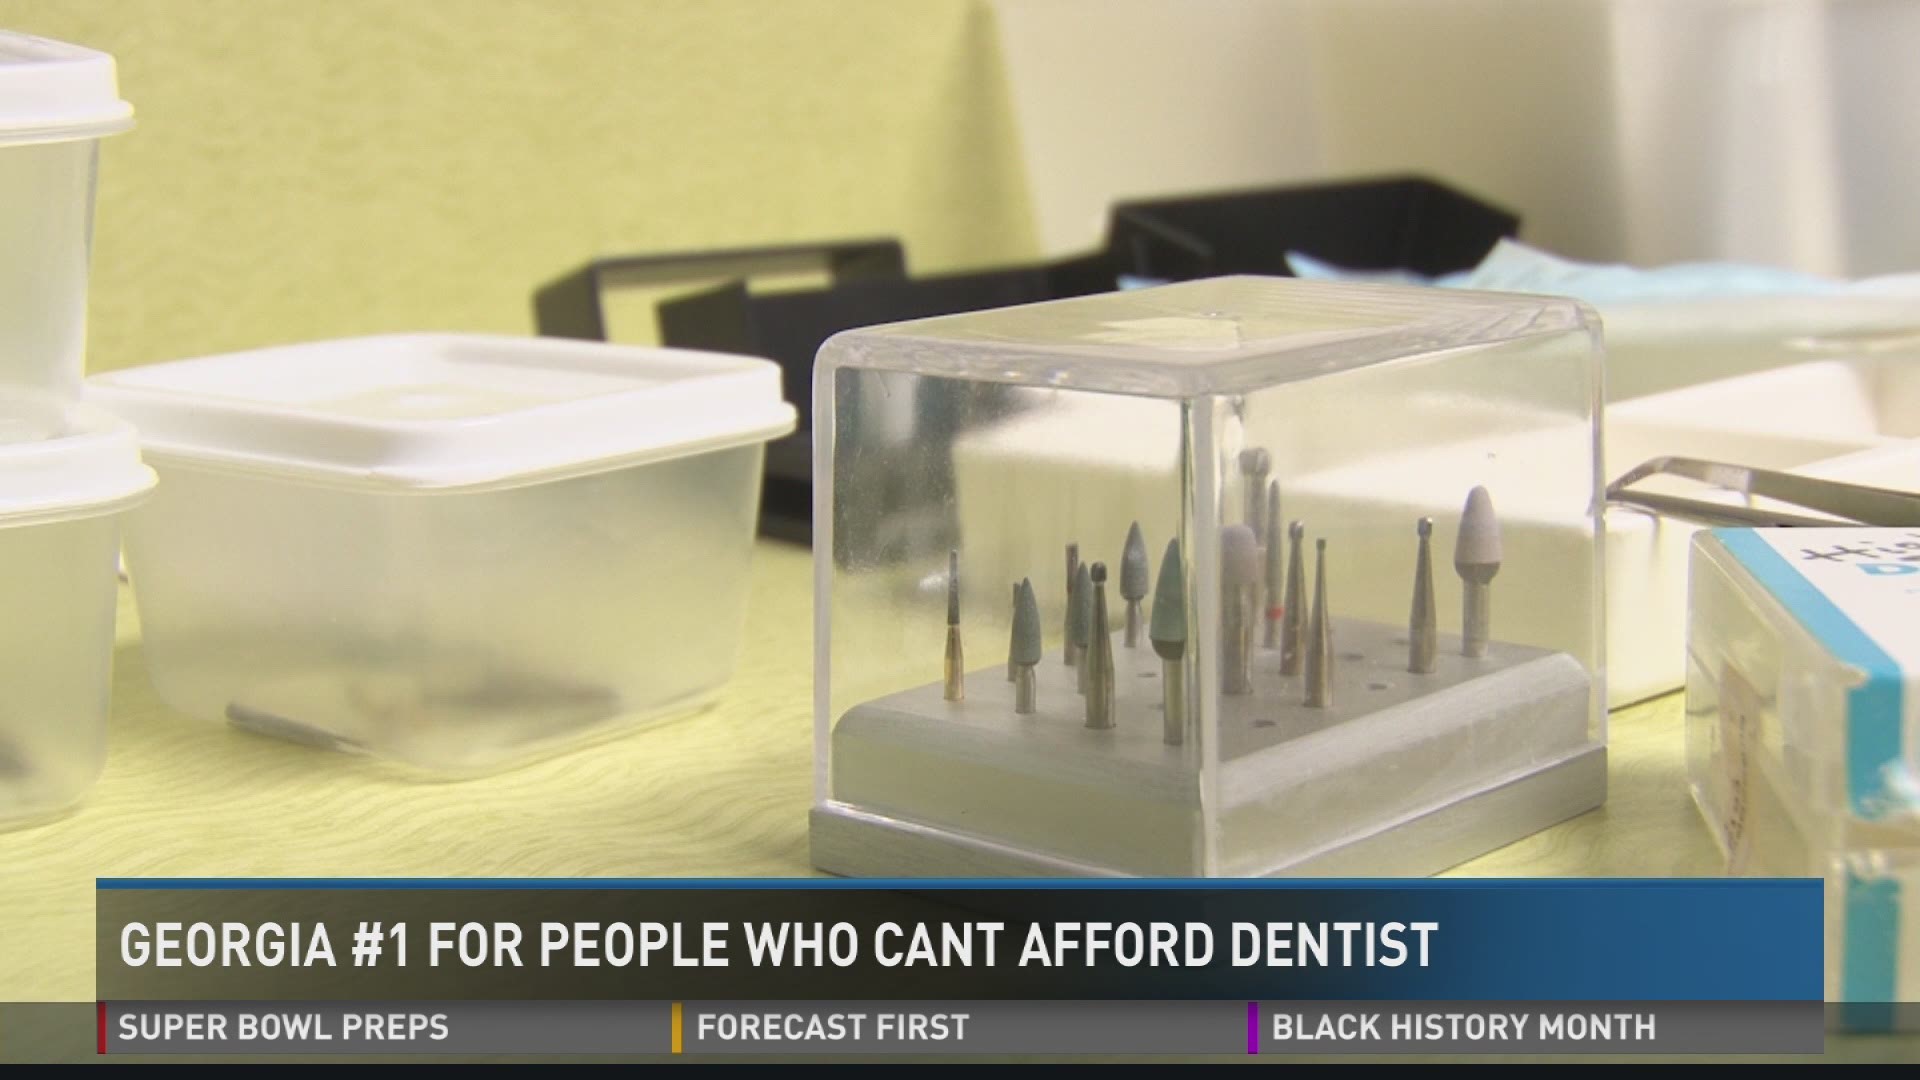 Georgia #1 for people who can't afford the dentist